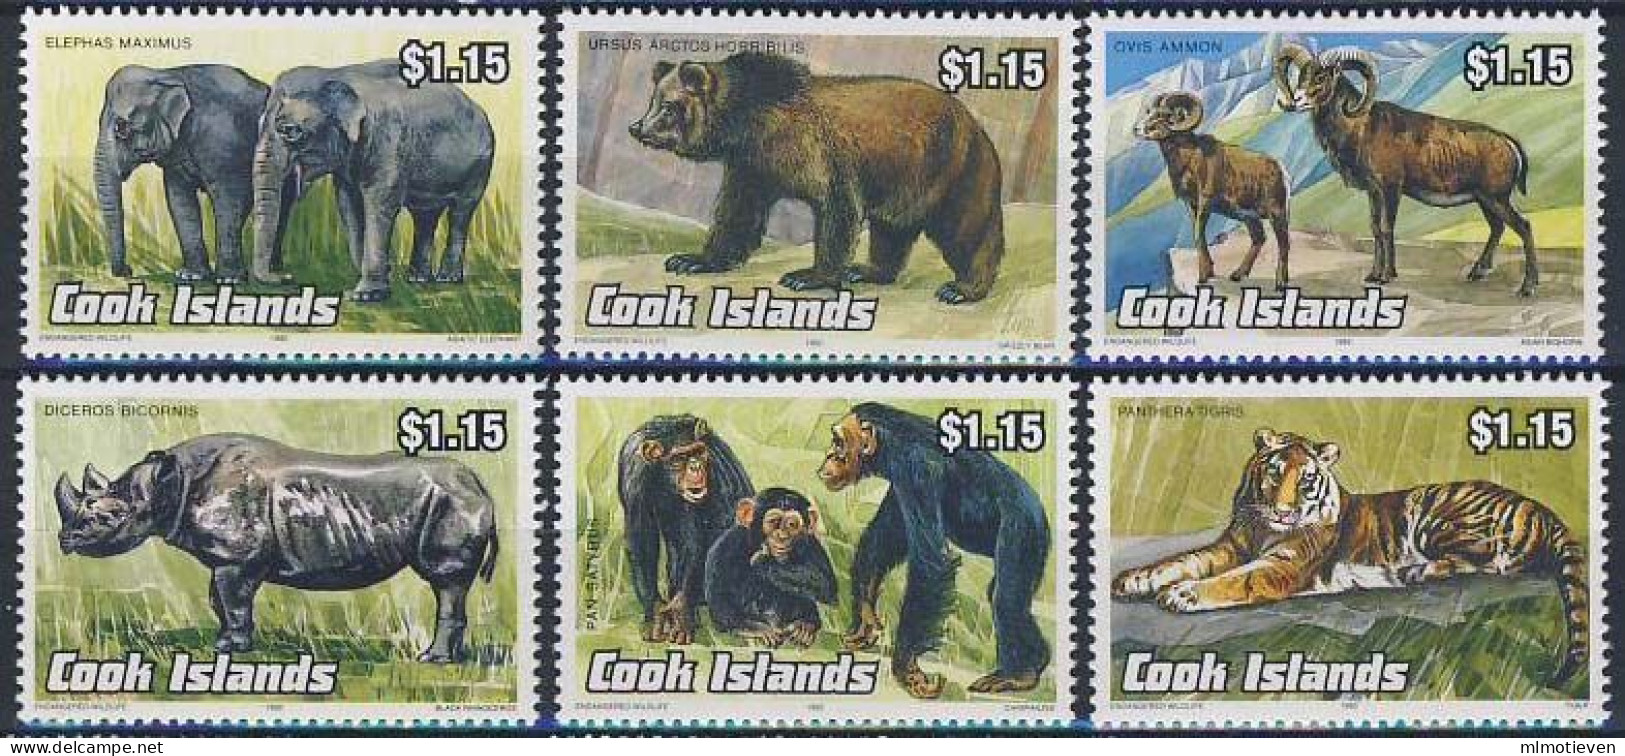 MDA-BK1-387 MINT PF/MNH ¤ COOK ISLANDS 1992 6w In Serie ¤ MAMMALS - ELEPHANTS - APES - BEARS - TIGRIS - AND OTHER - Wild